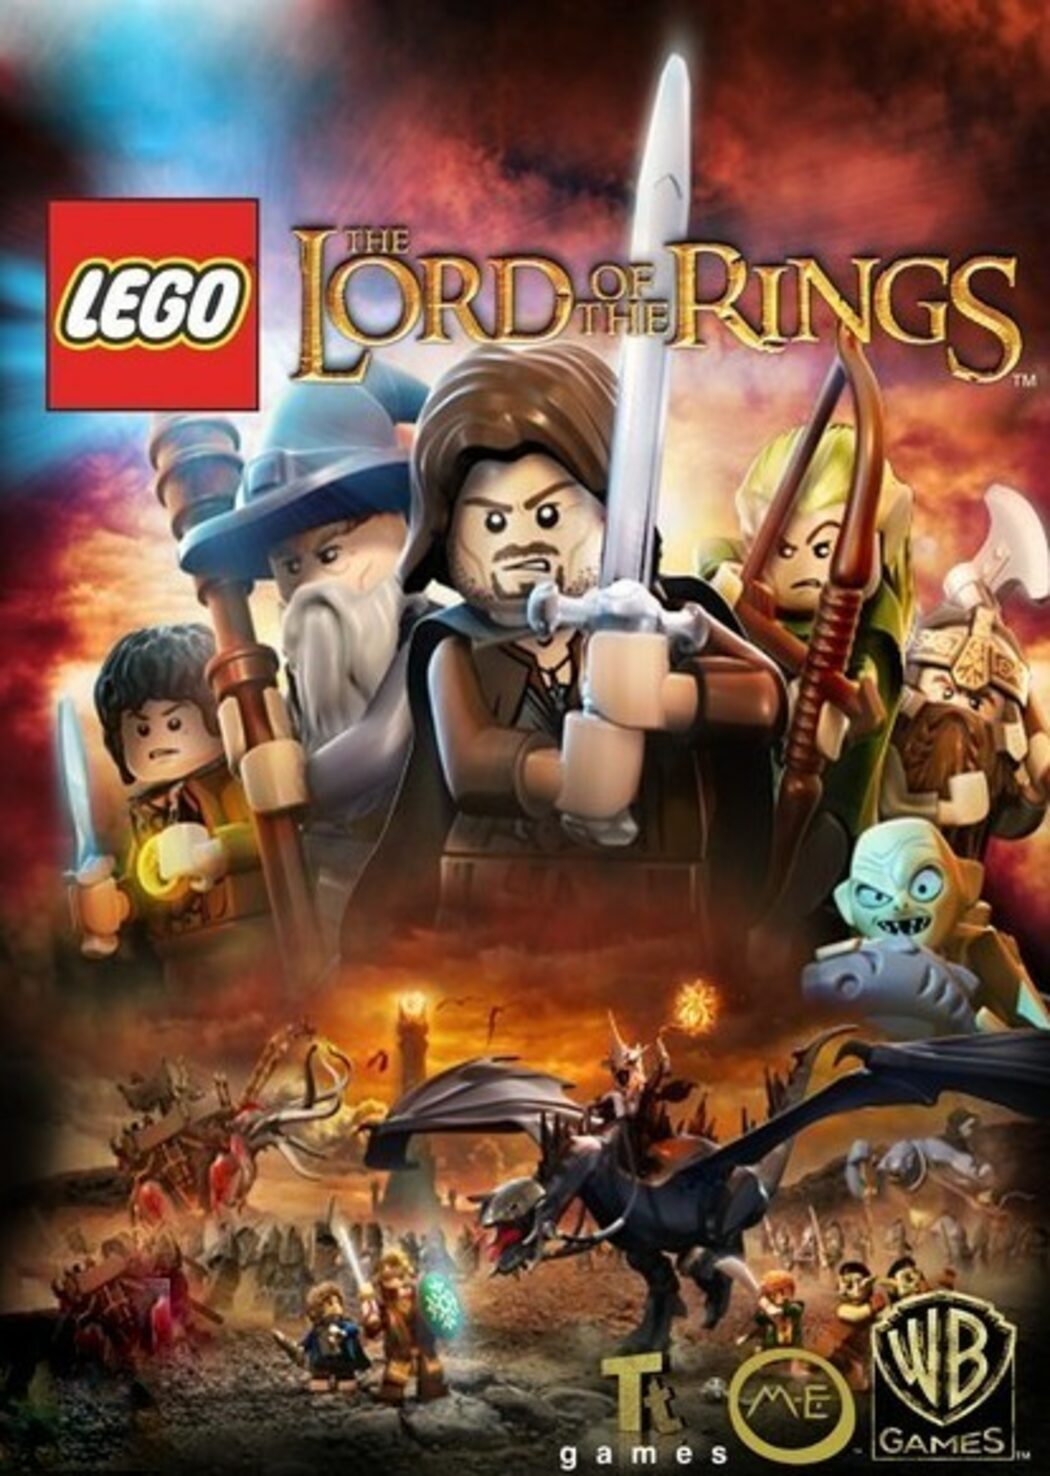 rights to lord of the rings games